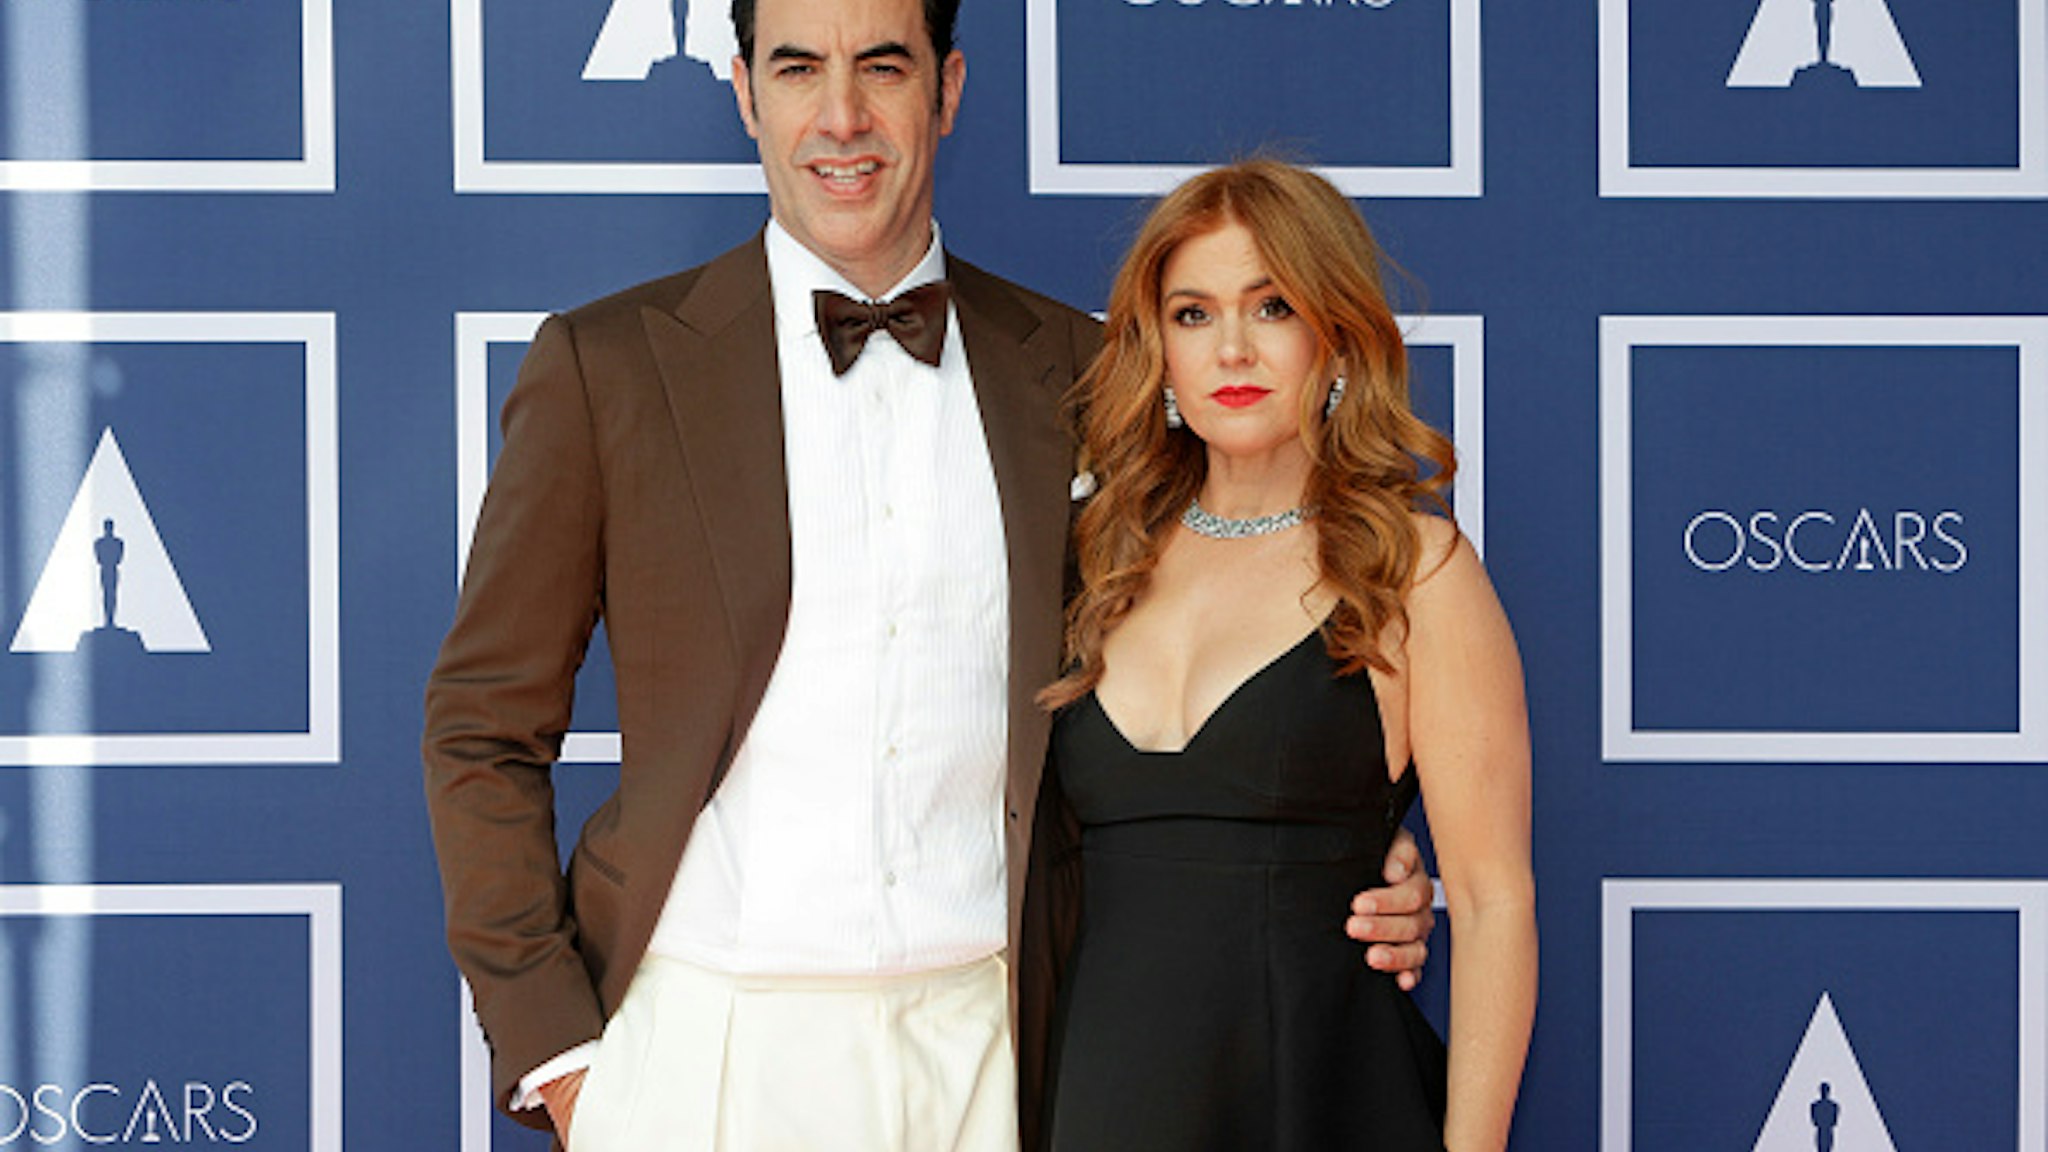 SYDNEY, AUSTRALIA - APRIL 26: Sacha Baron Cohen (L) and Isla Fisher attend a screening of the Oscars on Monday April 26, 2021 in Sydney, Australia.